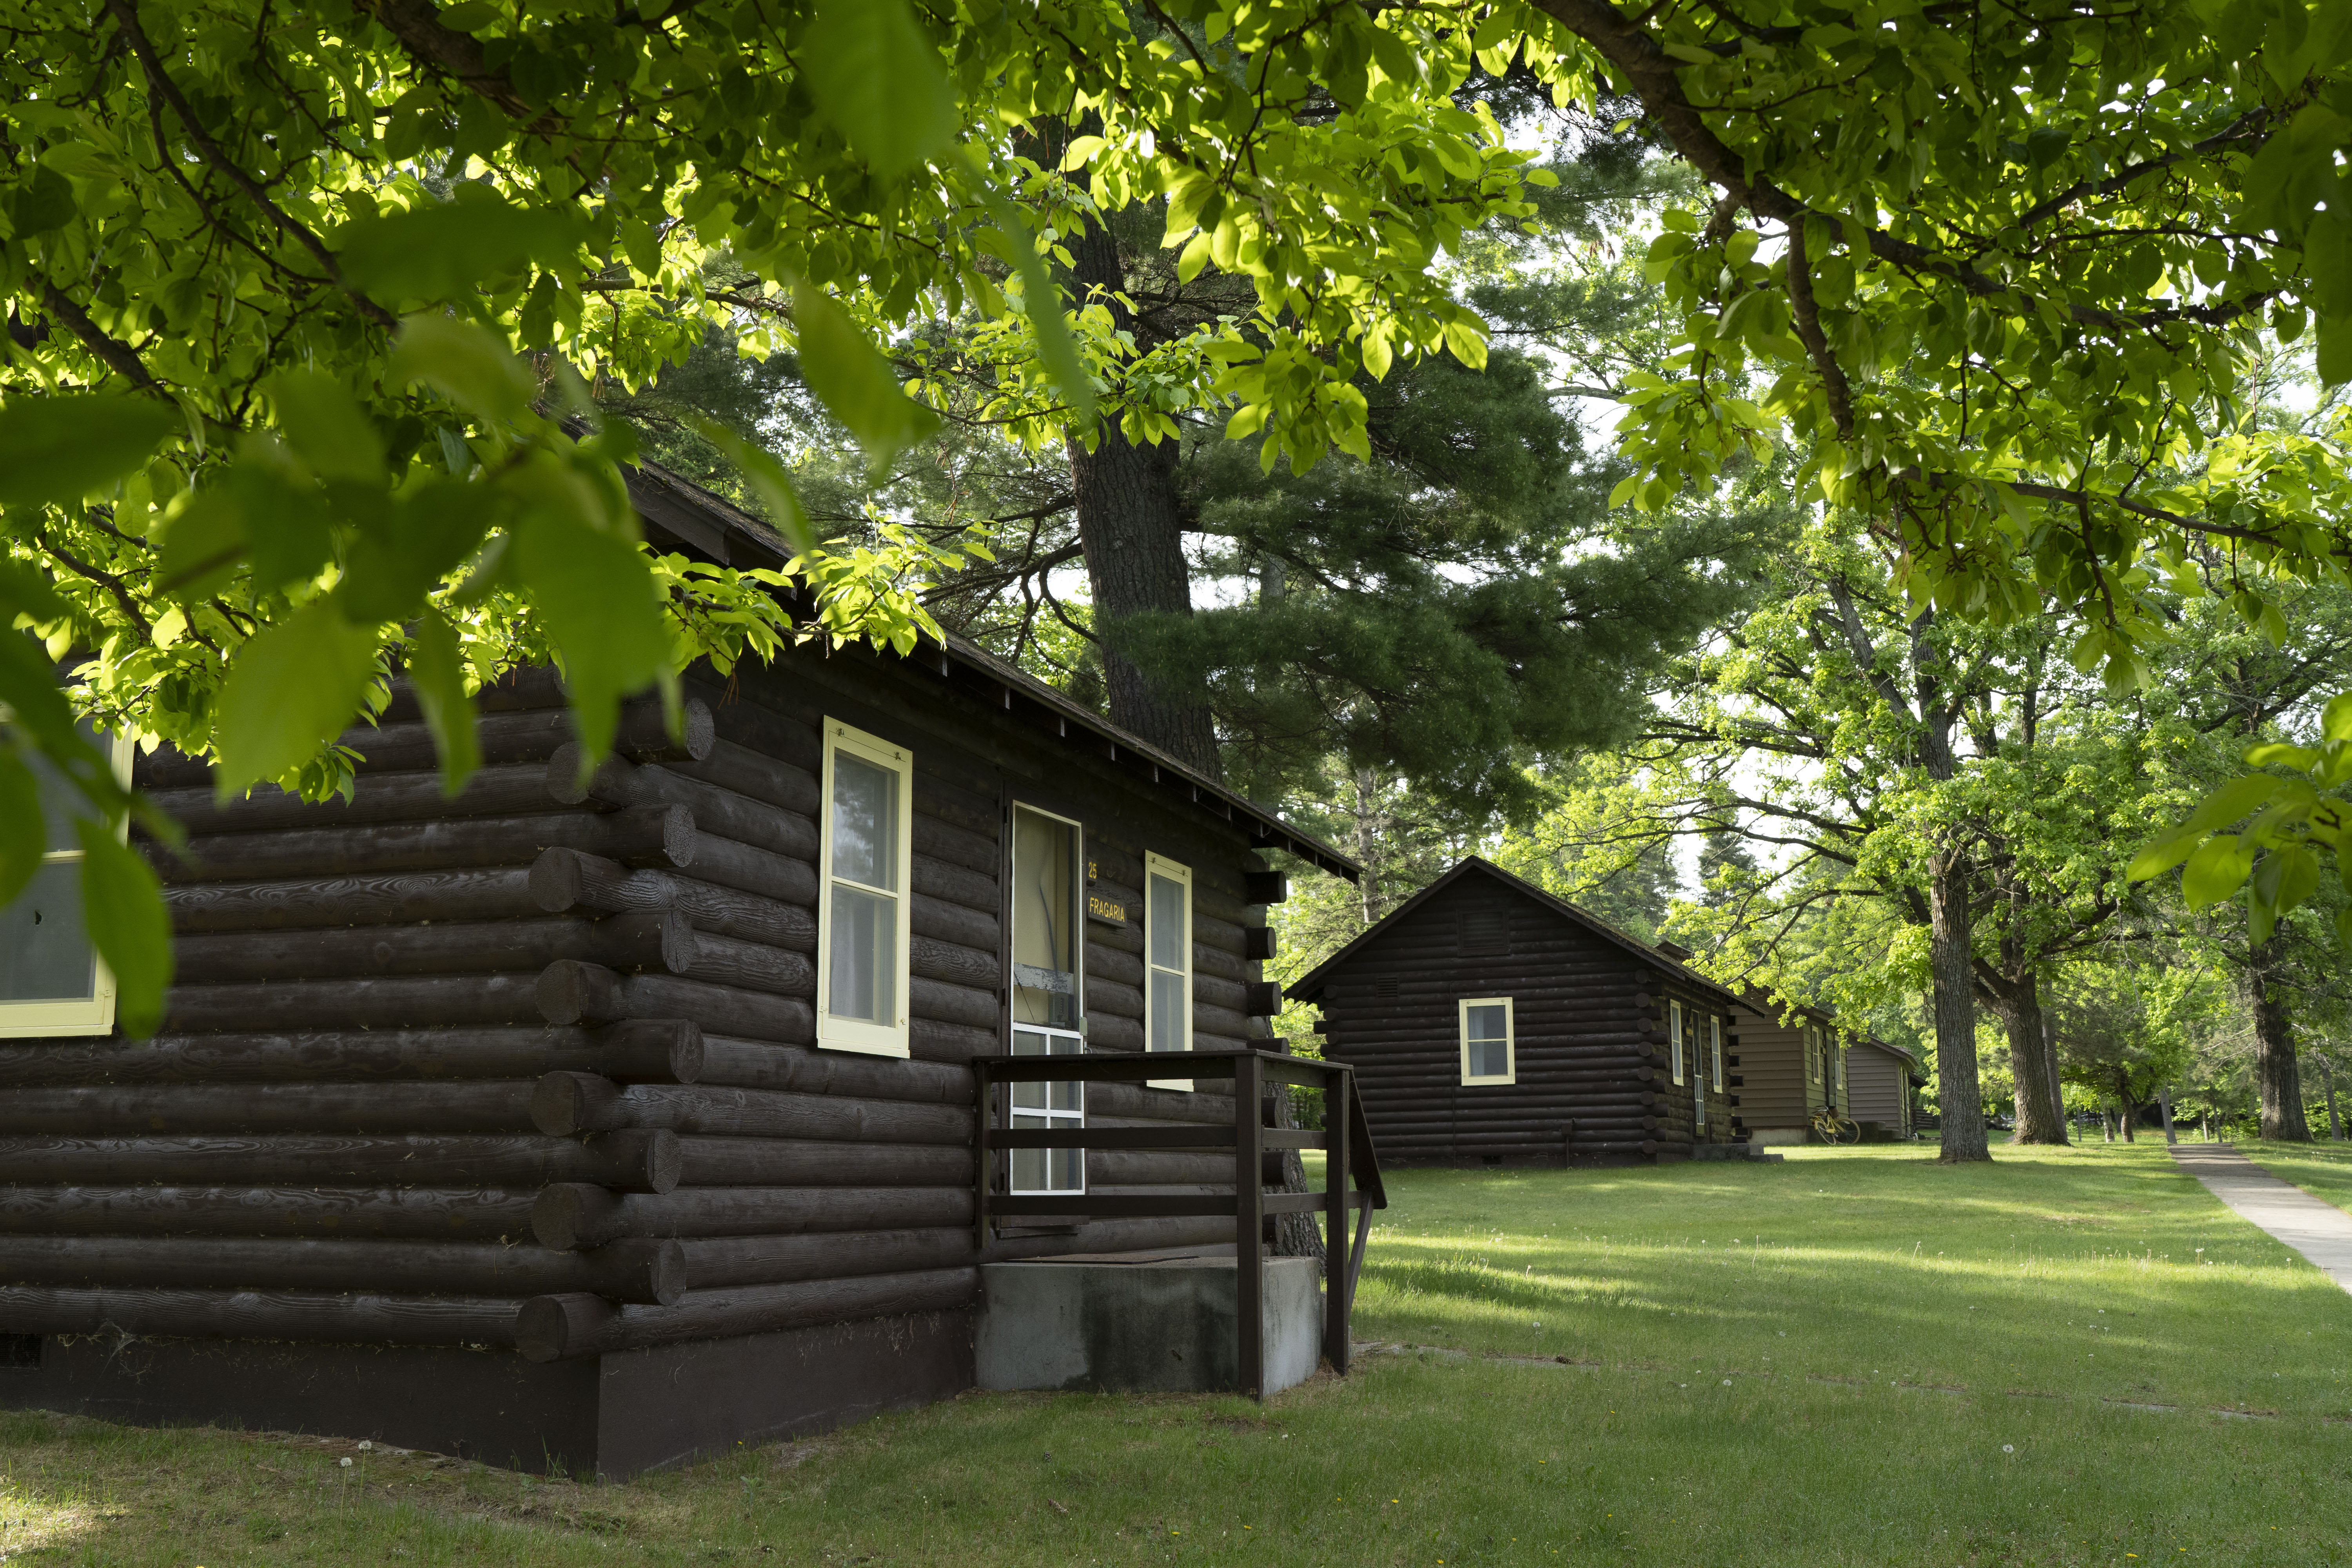 Front row of south-side student bunkhouse cabins at Itasca Station. Cabins shown are small, brown, log-style buildings.